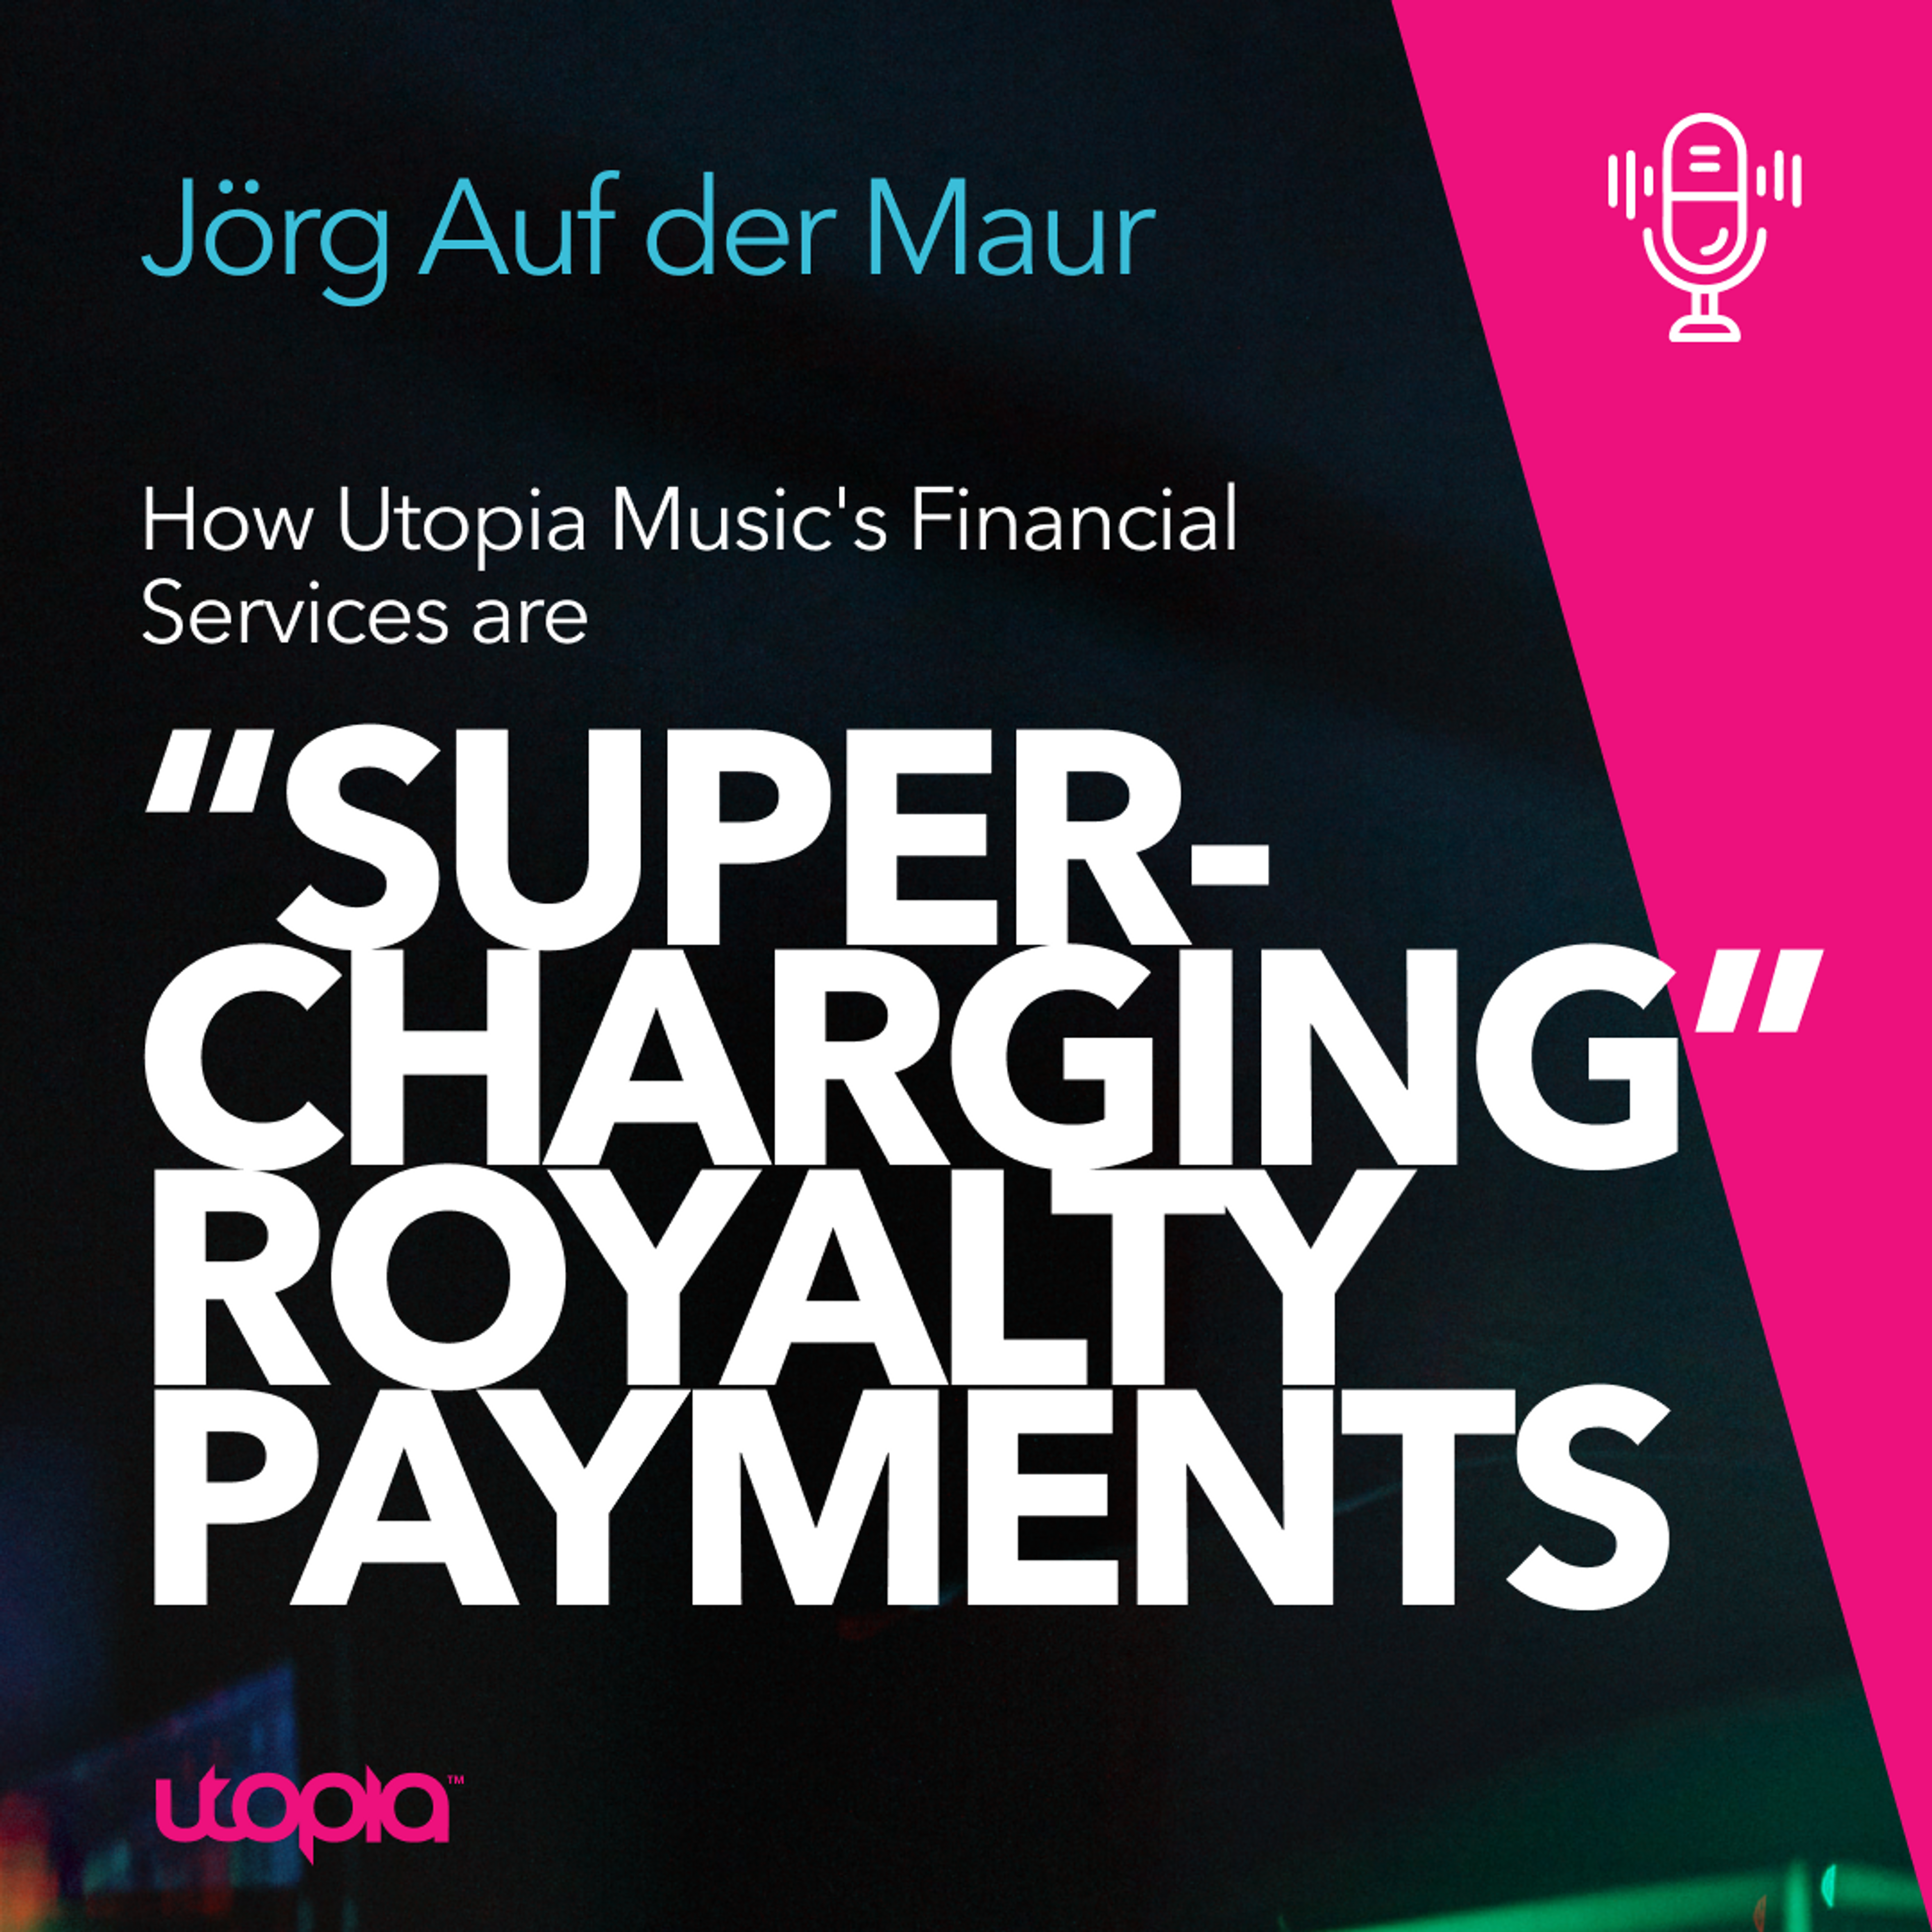 Card image for Fair Pay for Every Play, Ep 21: Jörg Auf der Maur - "Super-Charging" Royalty Payments